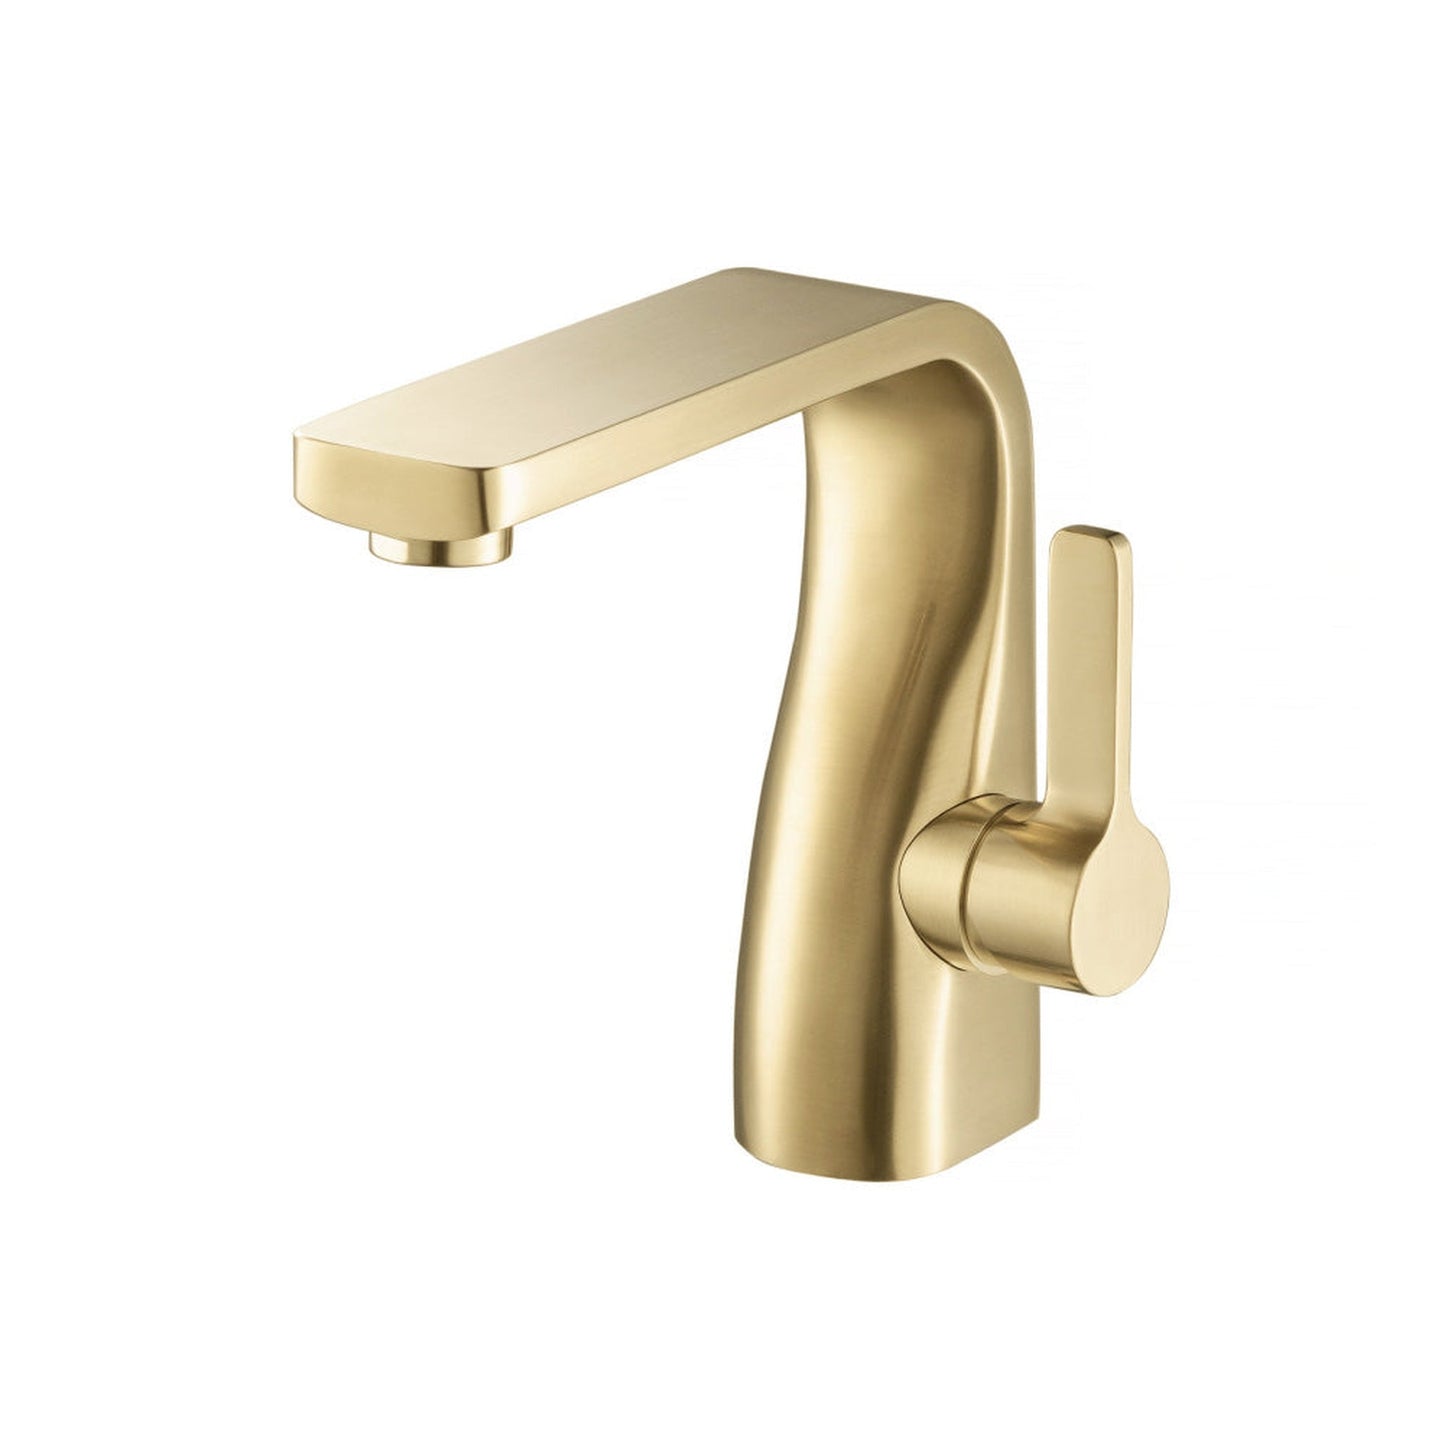 Isenberg Serie 260 6" Single-Hole Satin Brass PVD Deck-Mounted Bathroom Sink Faucet With Pop-Up Drain